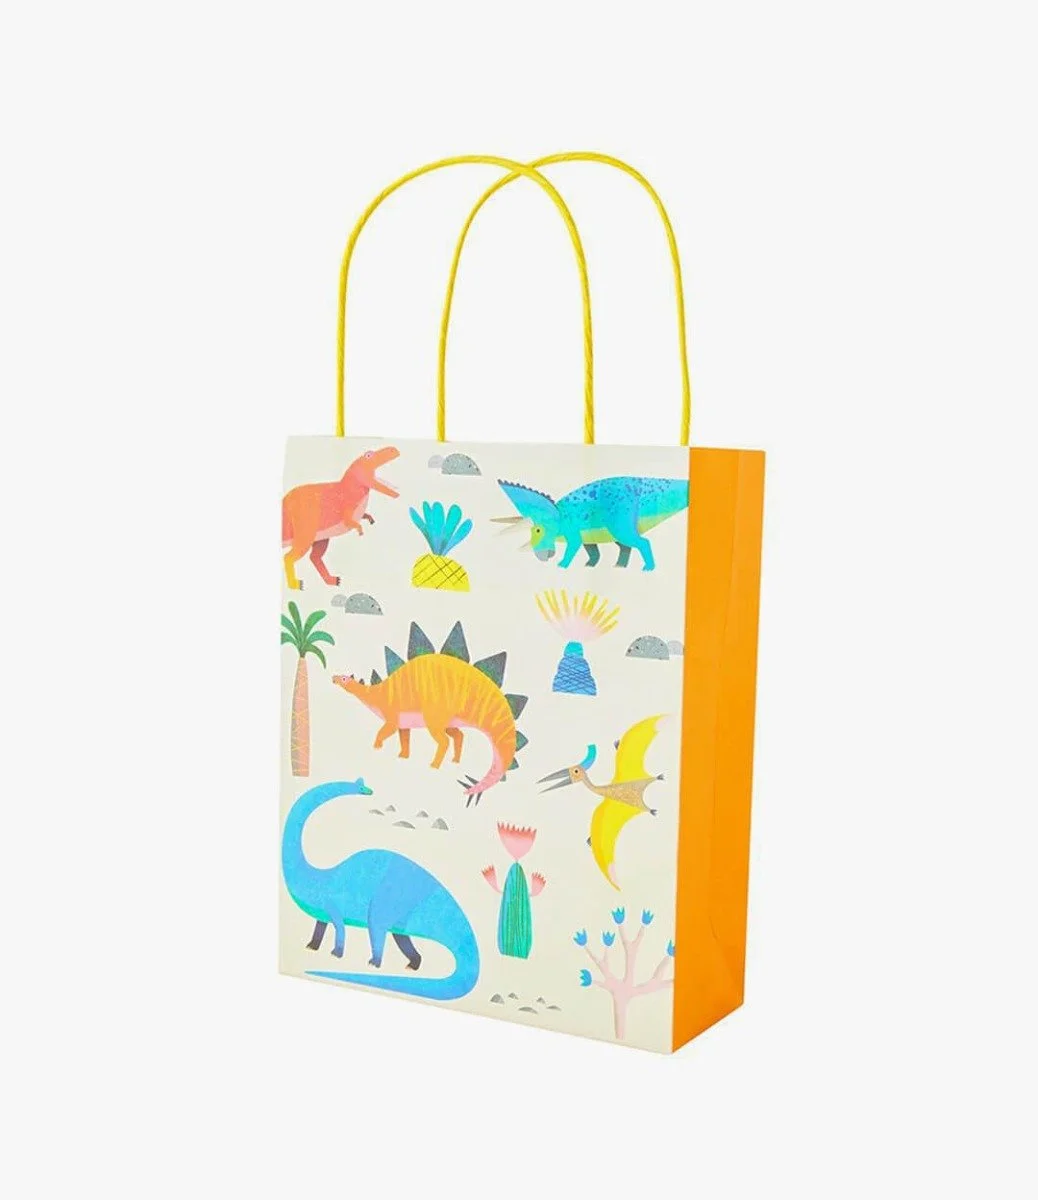 Dinosaur Treat Bag 8pc Pack by Talking Tables